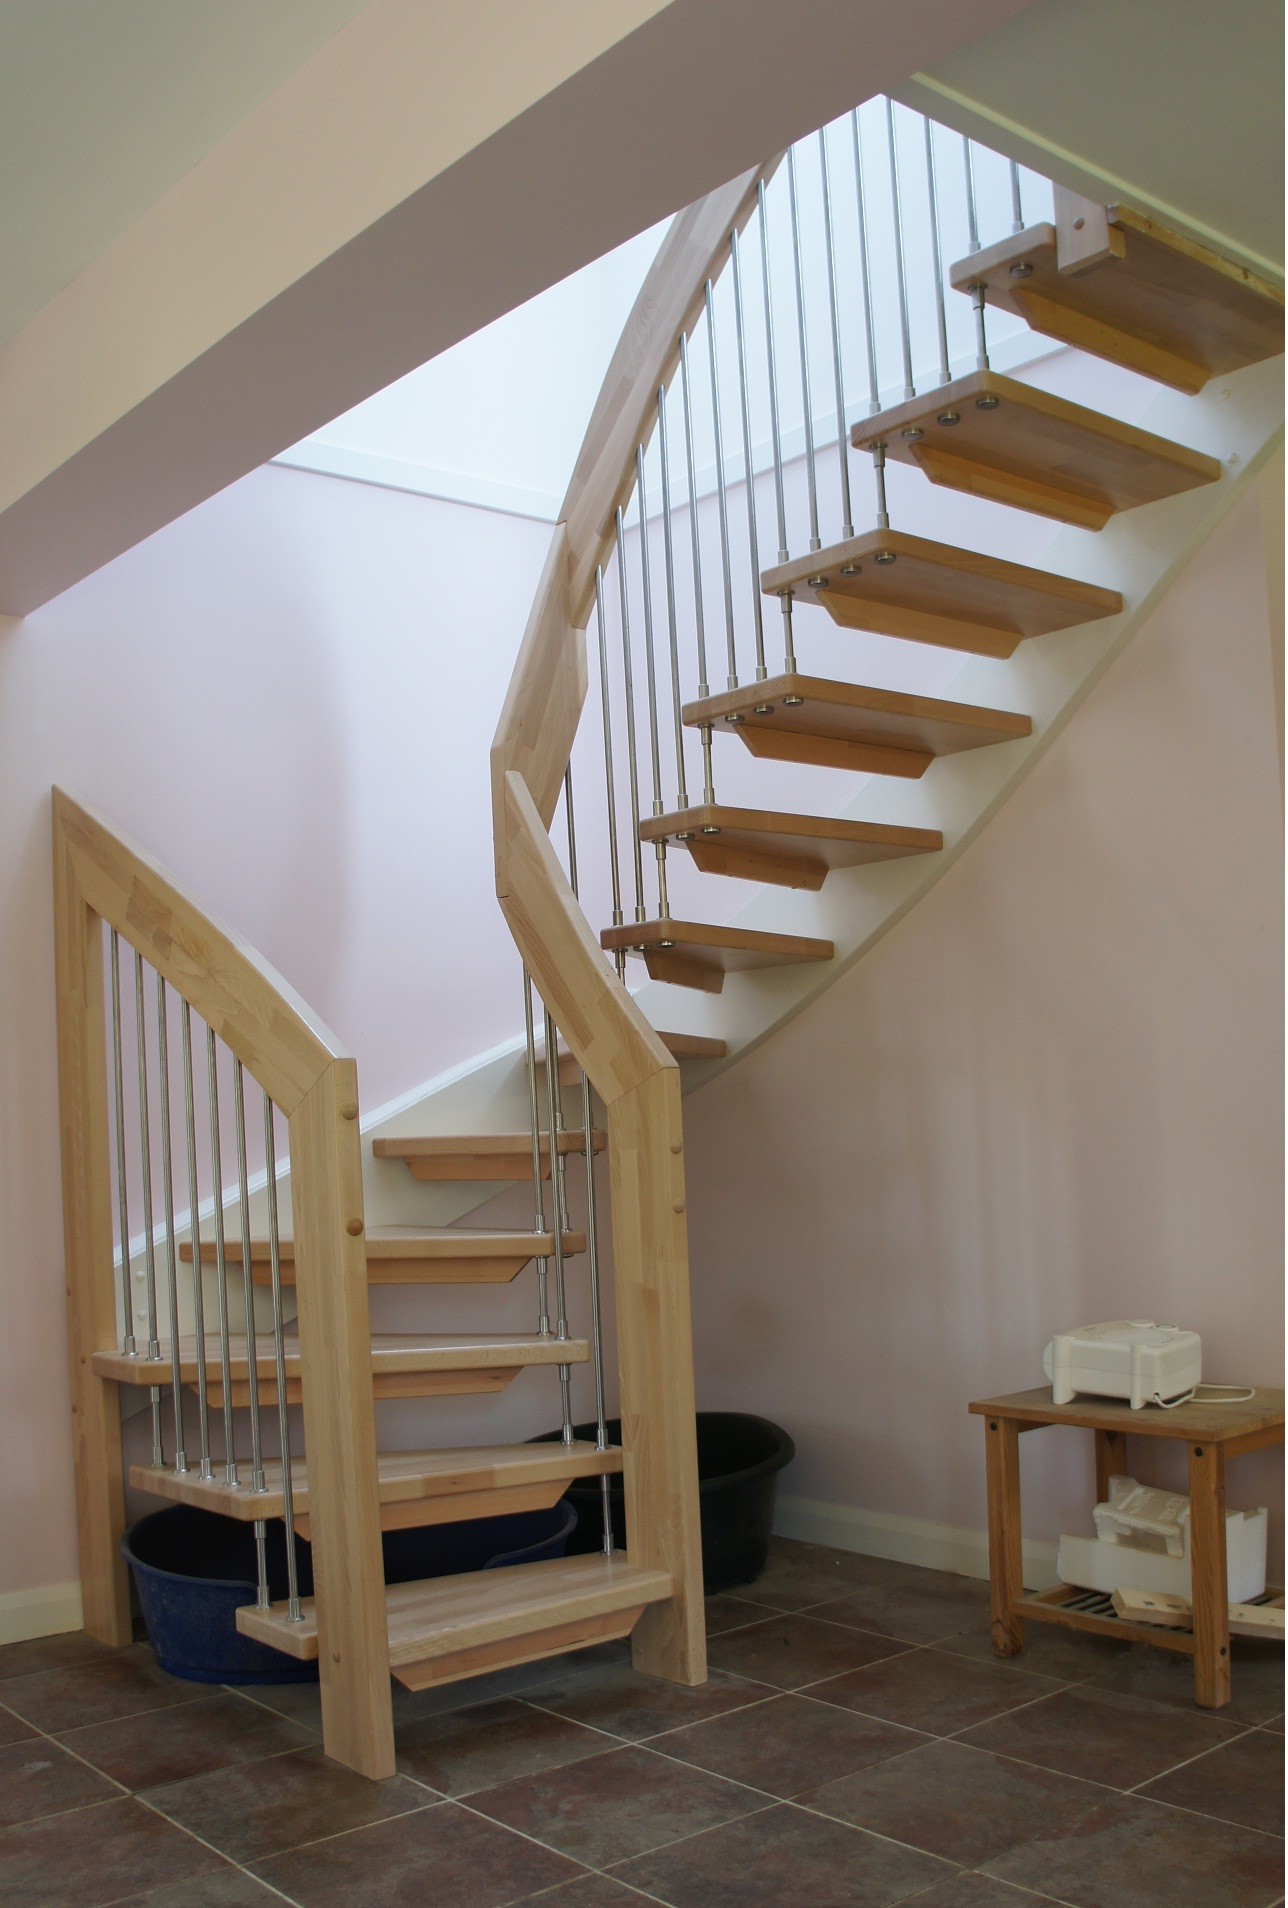 Simple Design Ideas Of Small Space Staircase With Brown Wooden Small ...